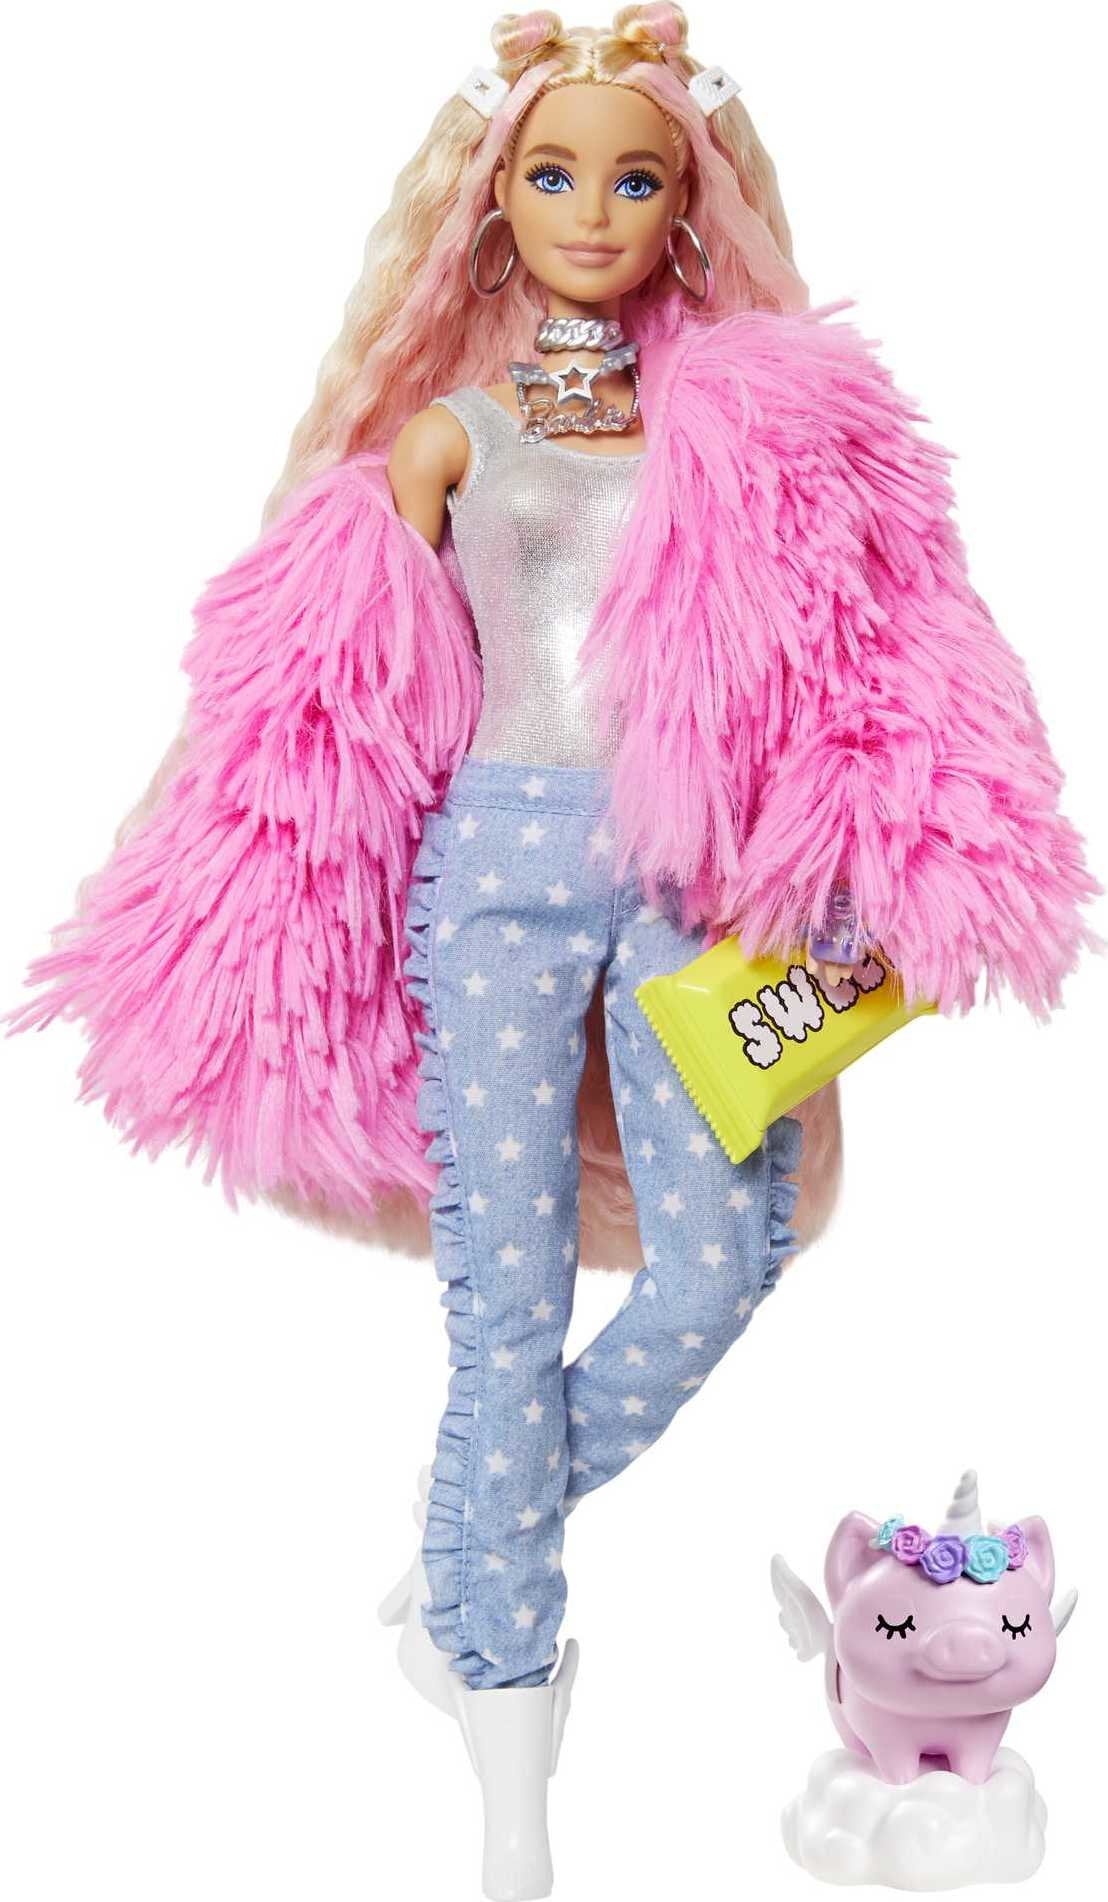 Barbie Extra Fashion Doll with Crimped Hair in Fluffy Pink Coat Accessories & Pet Walmart.com